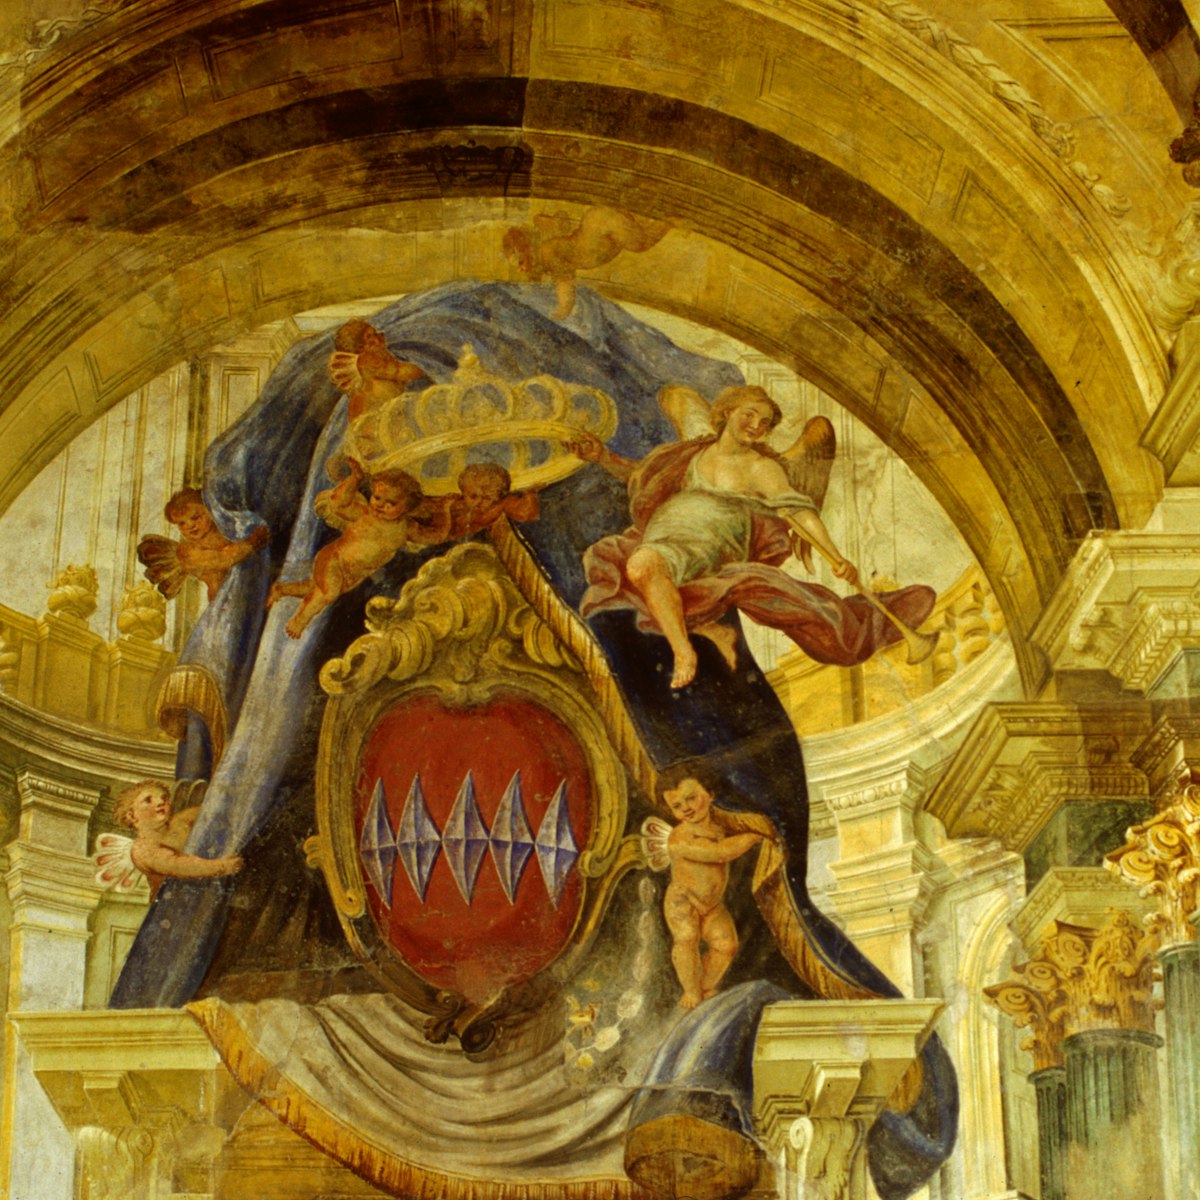 Mural inside the 15th century Duomo (cathedral) of Sorrento.